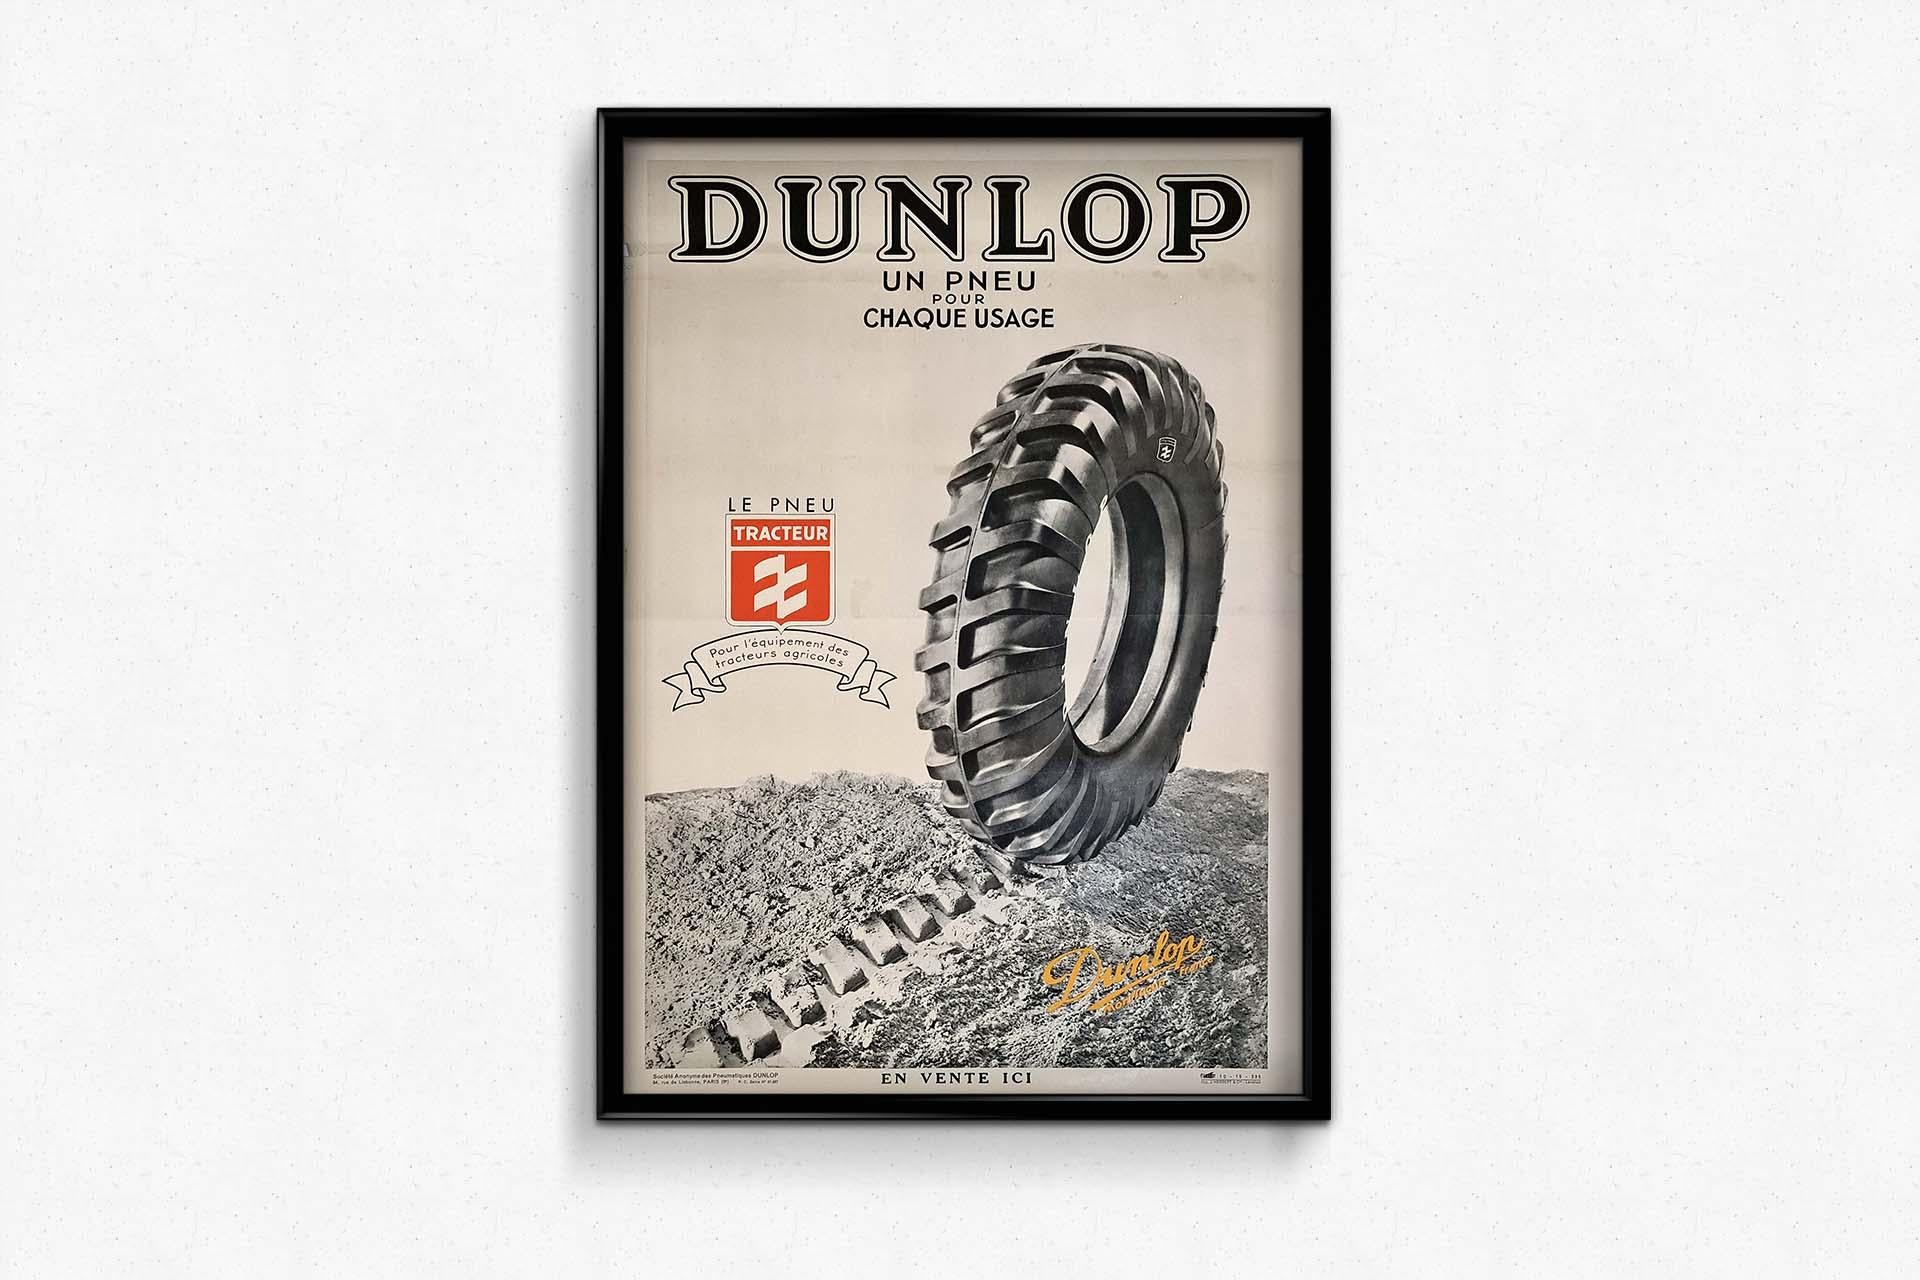 The 1935 original advertising poster for Dunlop unveils 